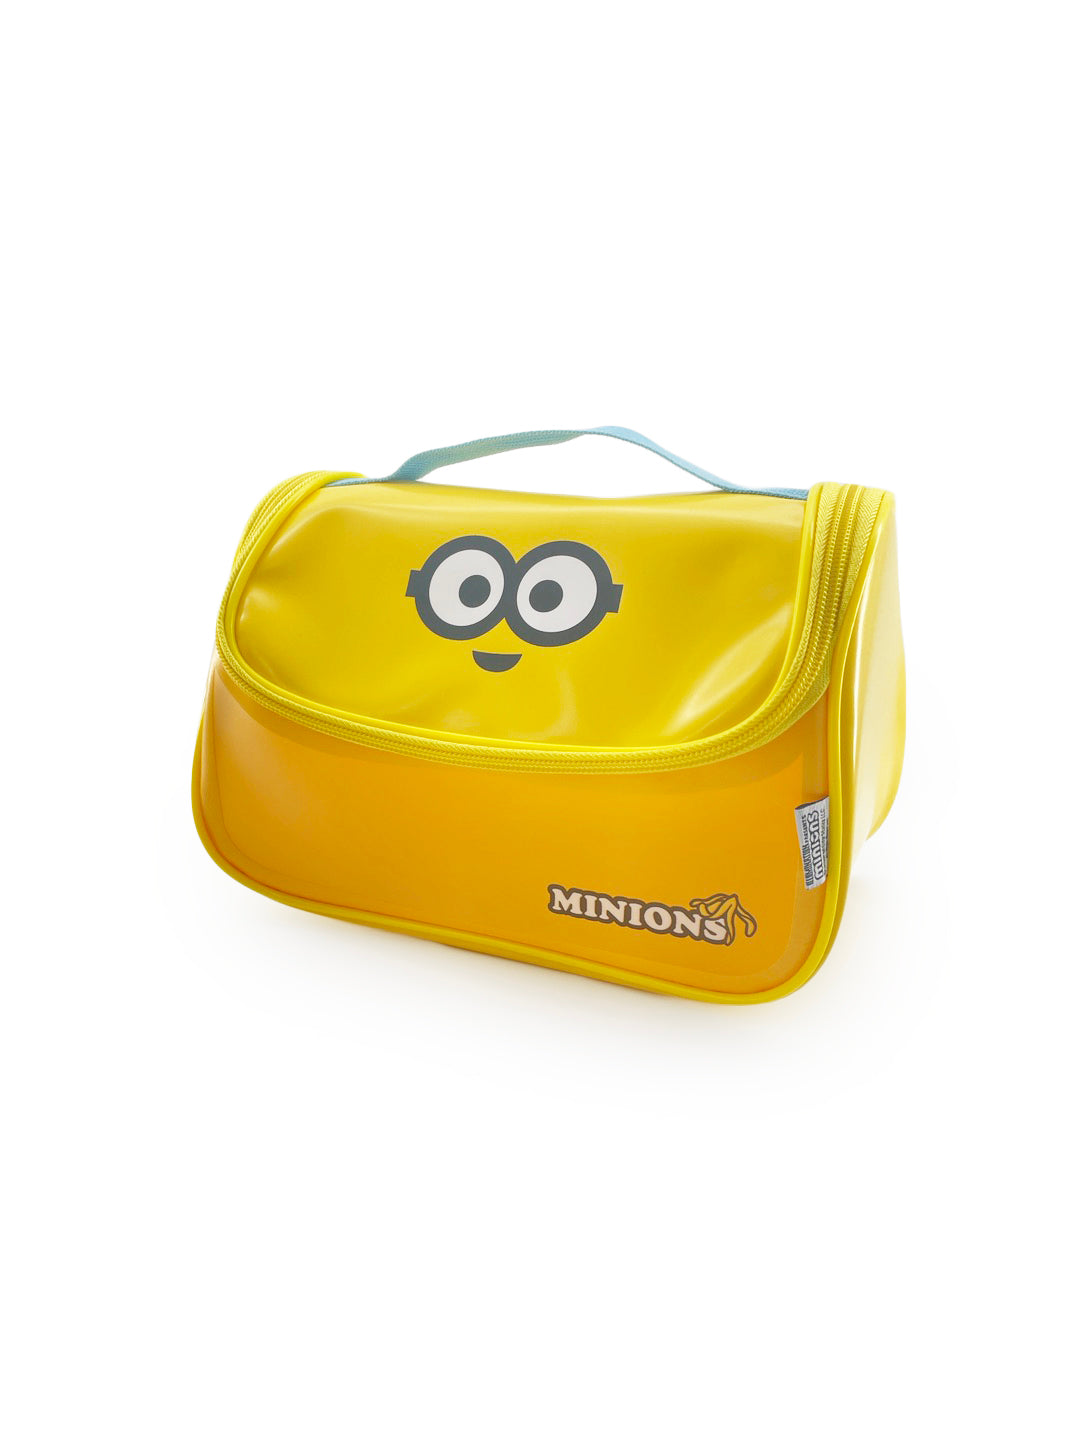 MINISO MINIONS COLLECTION TOILETRY BAG WITH HOOK 2014107410103 TRAVEL STORAGE BAG